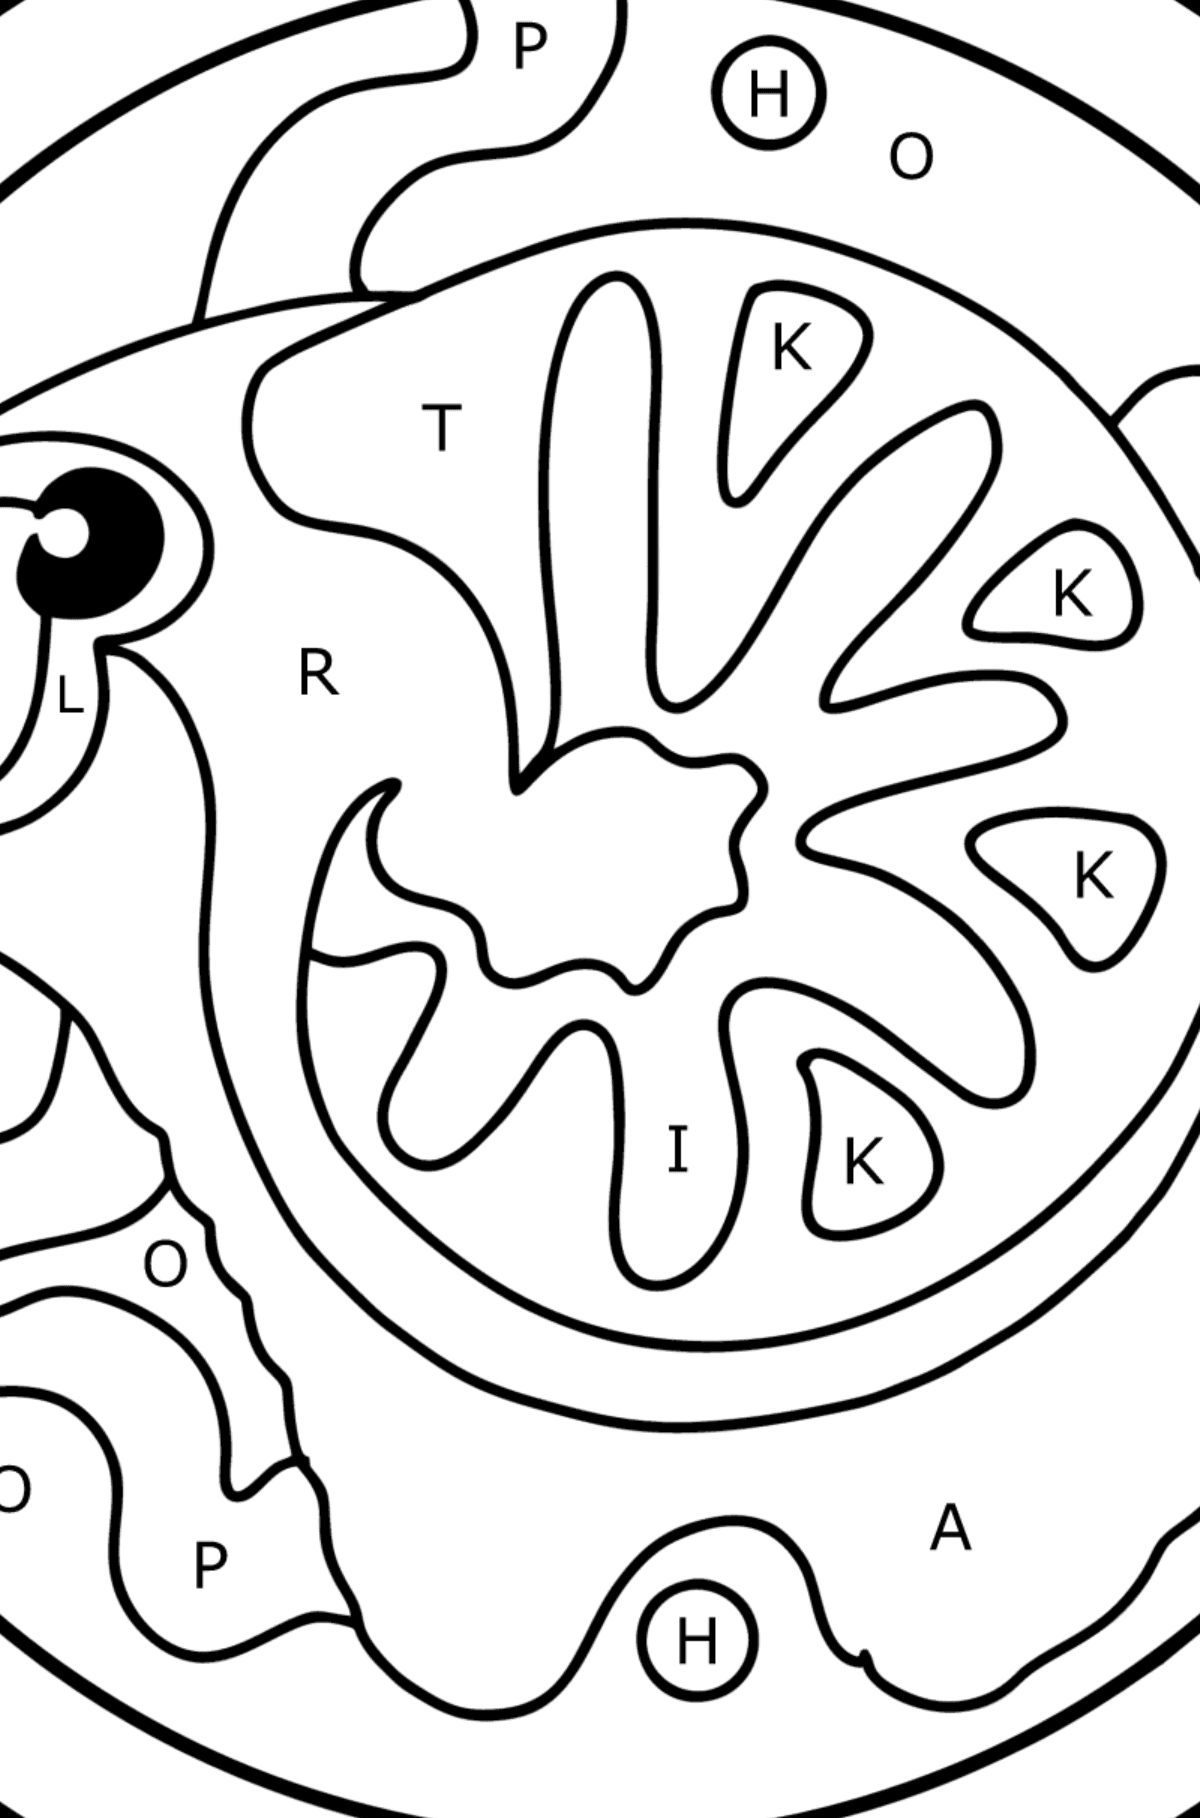 Coloring page for kids - zodiac sign Aries - Coloring by Letters for Kids